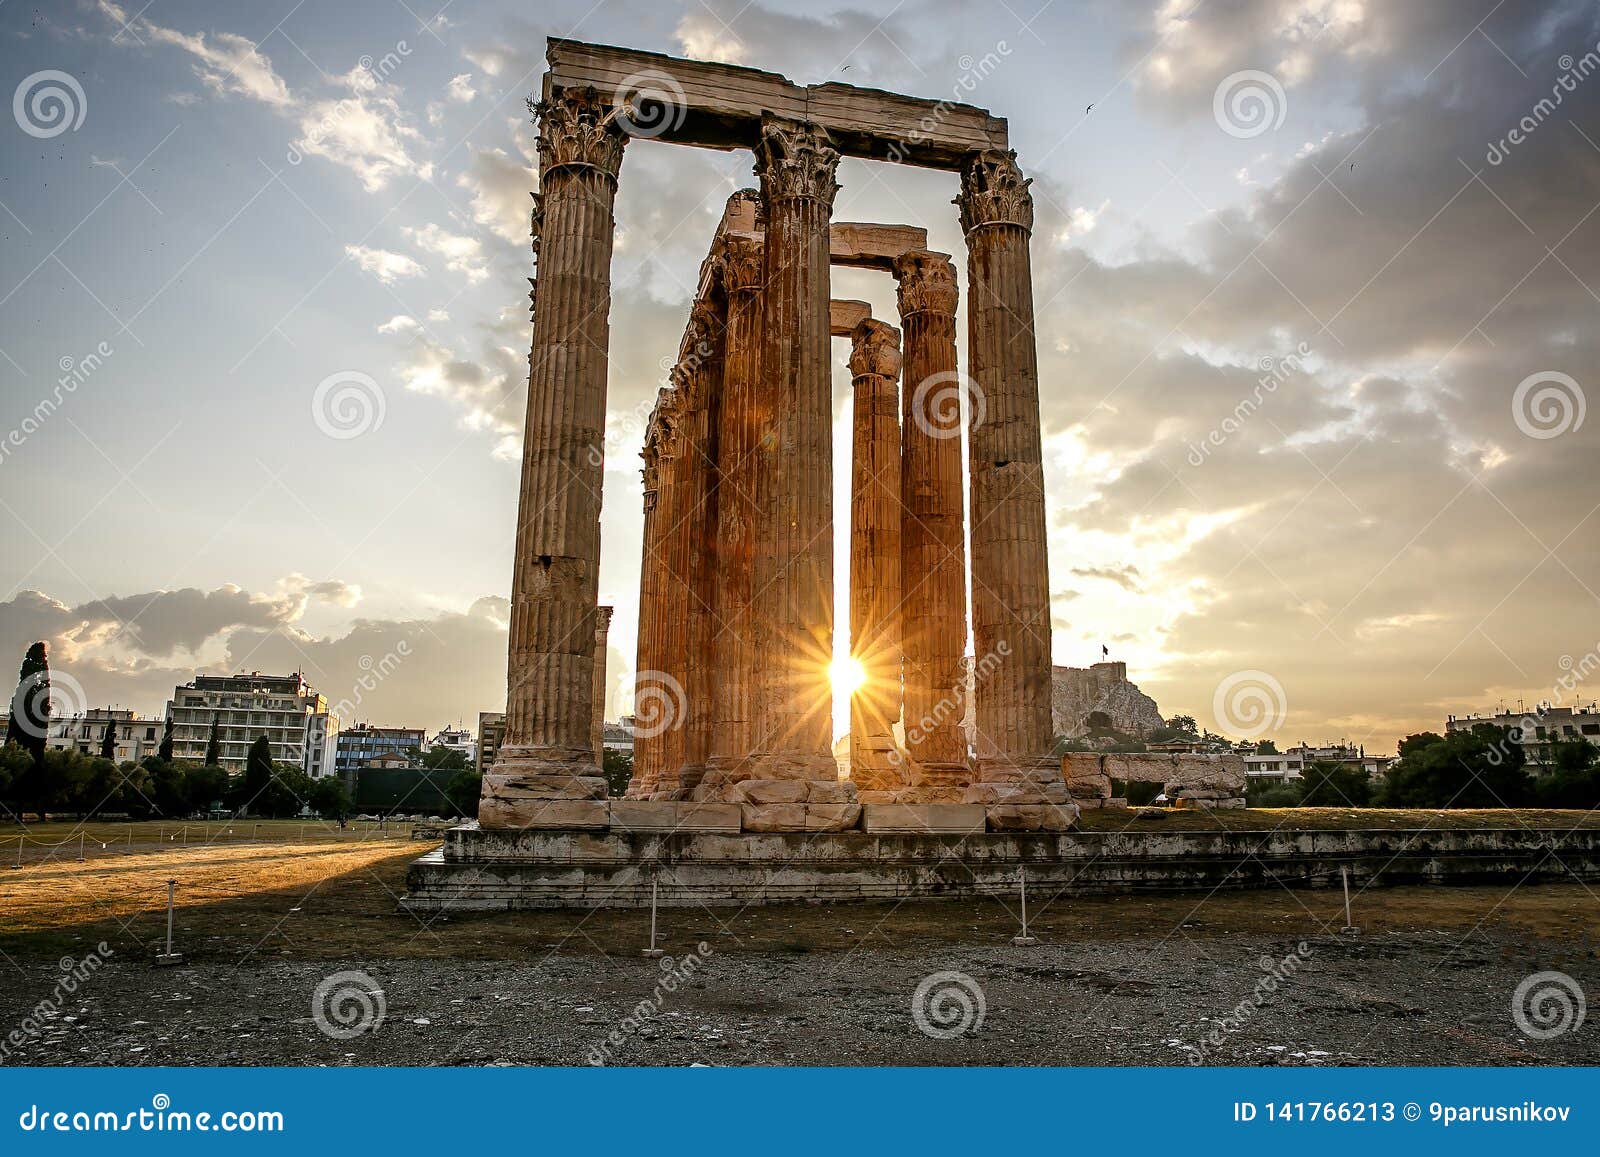 Først omvendt Demon Play The Ancient Greek Columns of Ancient Temple of Zeus, Olympeion, Athens,  Sunset Light, Stock Image - Image of athens, acropolis: 141766213